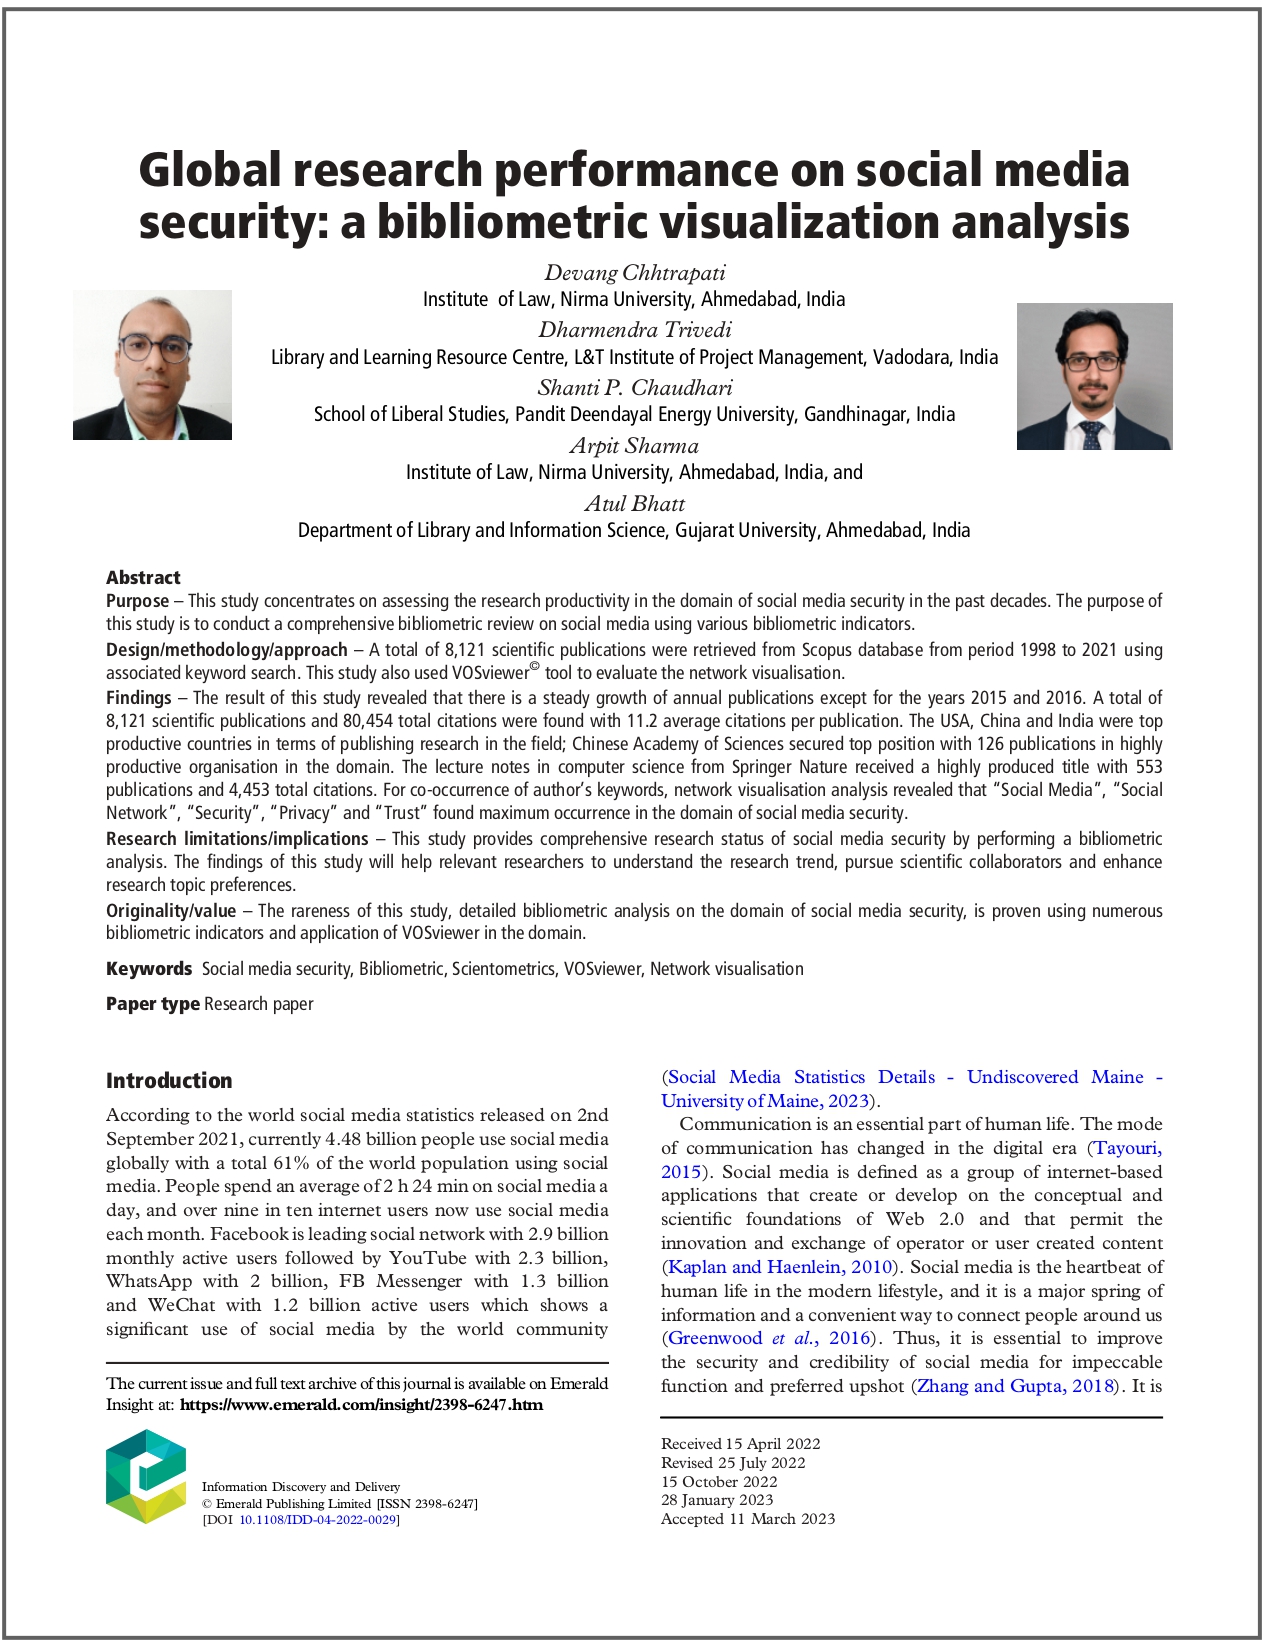 Global Research Performance on Social Media Security: A Bibliometric Visualization Analysis